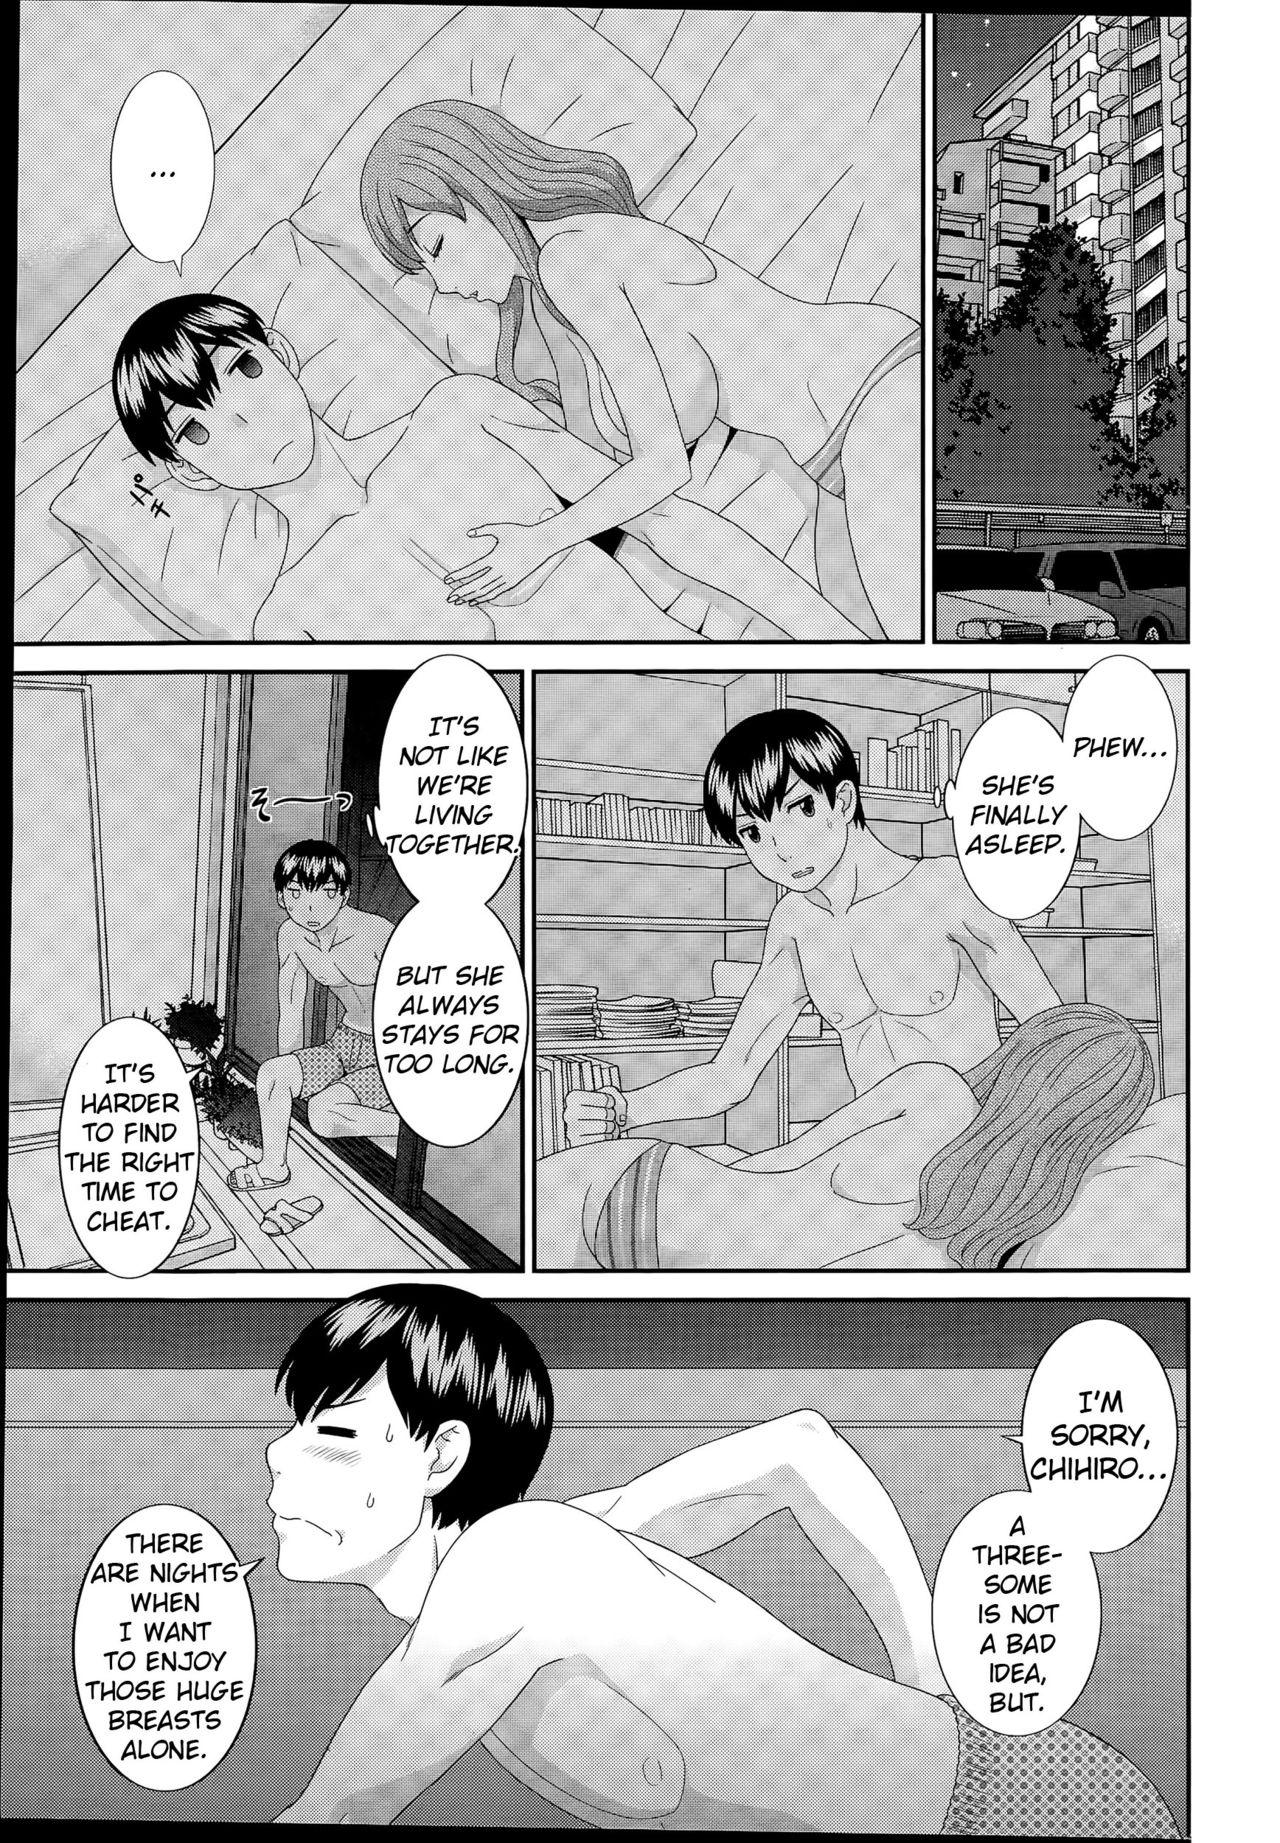 Chaturbate Okusan to Kanojo to ♥ Ch. 10-19 Amateur - Page 9